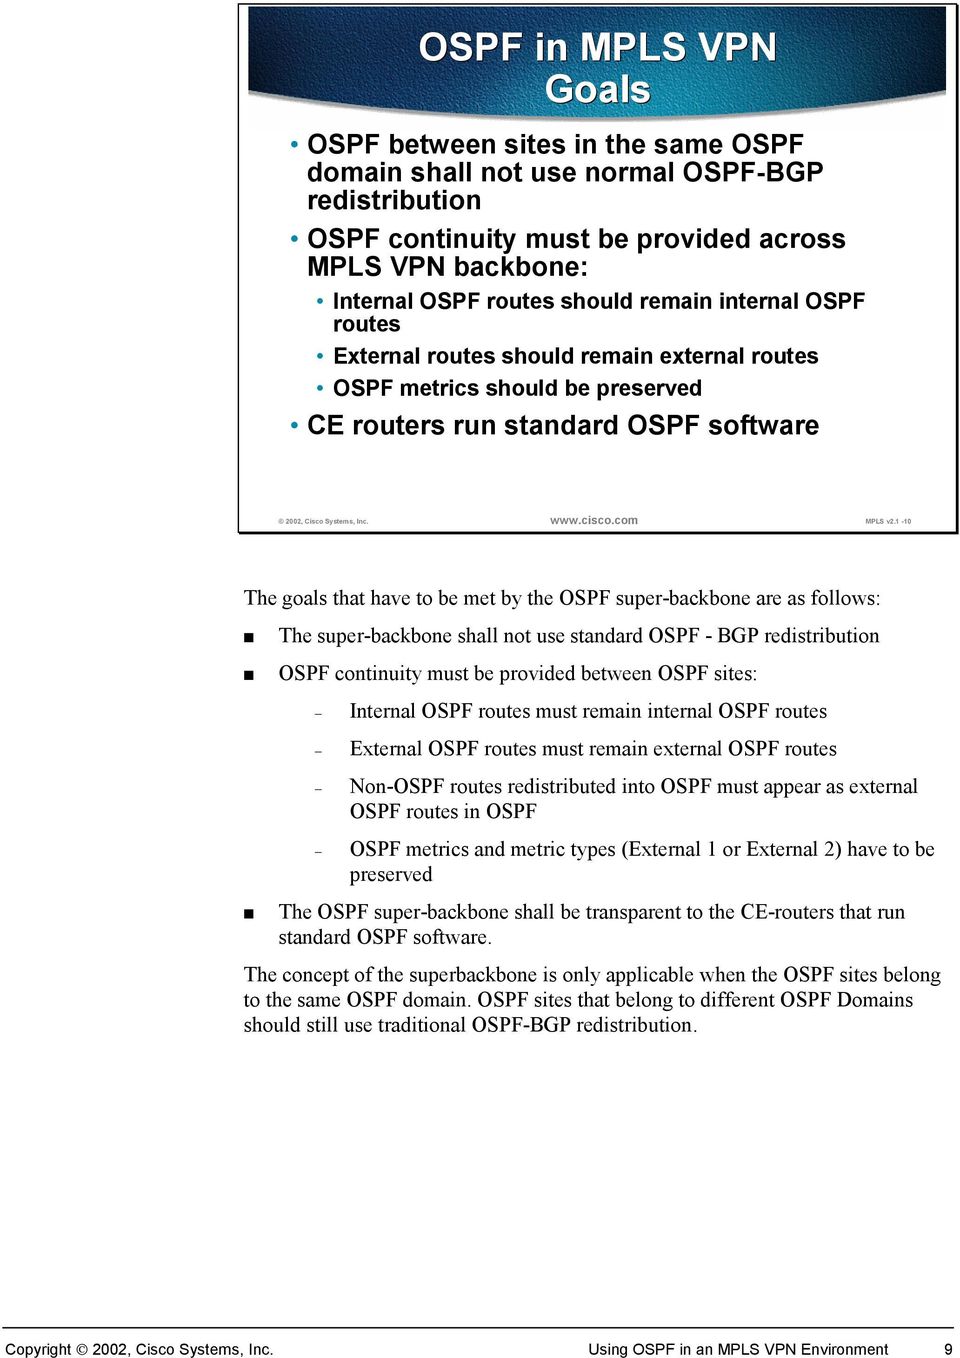 1-10 The goals that have to be met by the OSPF super-backbone are as follows: The super-backbone shall not use standard OSPF - BGP redistribution OSPF continuity must be provided between OSPF sites: